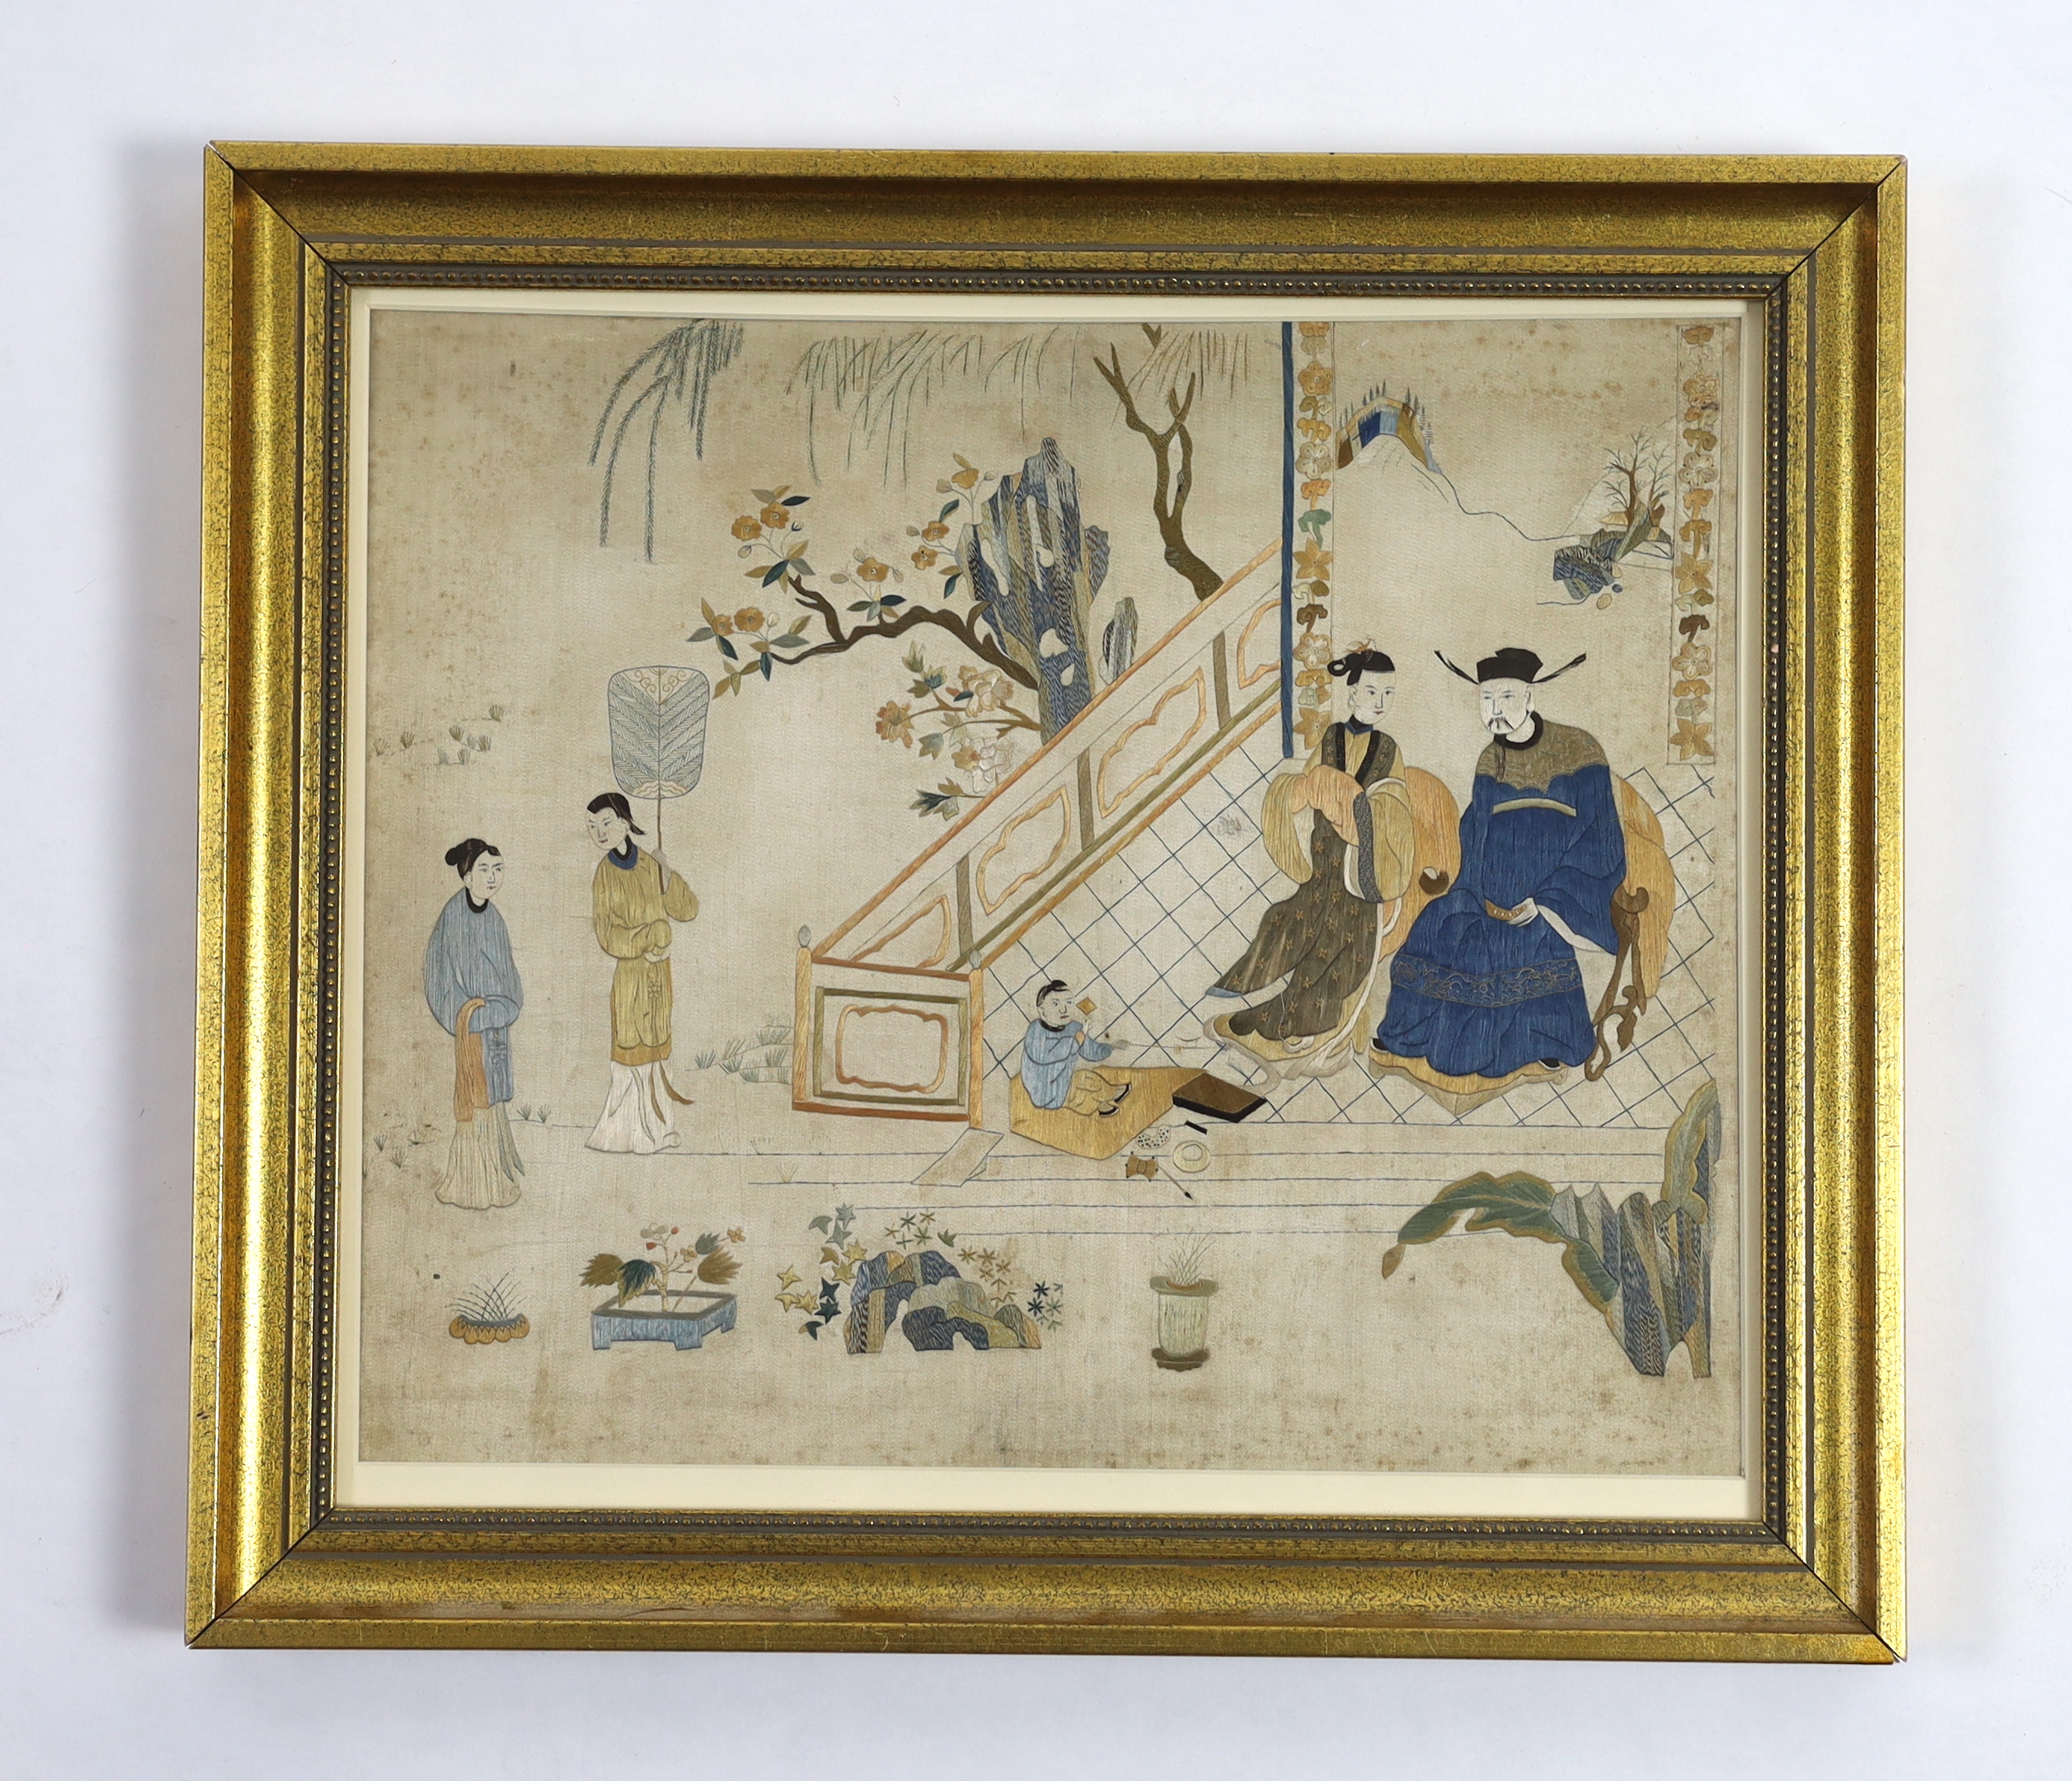 An early 19th century Chinese finely embroidered silk picture, of a nobleman, his wife and child and their attendants. Possibly a court scene. Worked mainly in stem stitch, in golds, blues, greens and white.